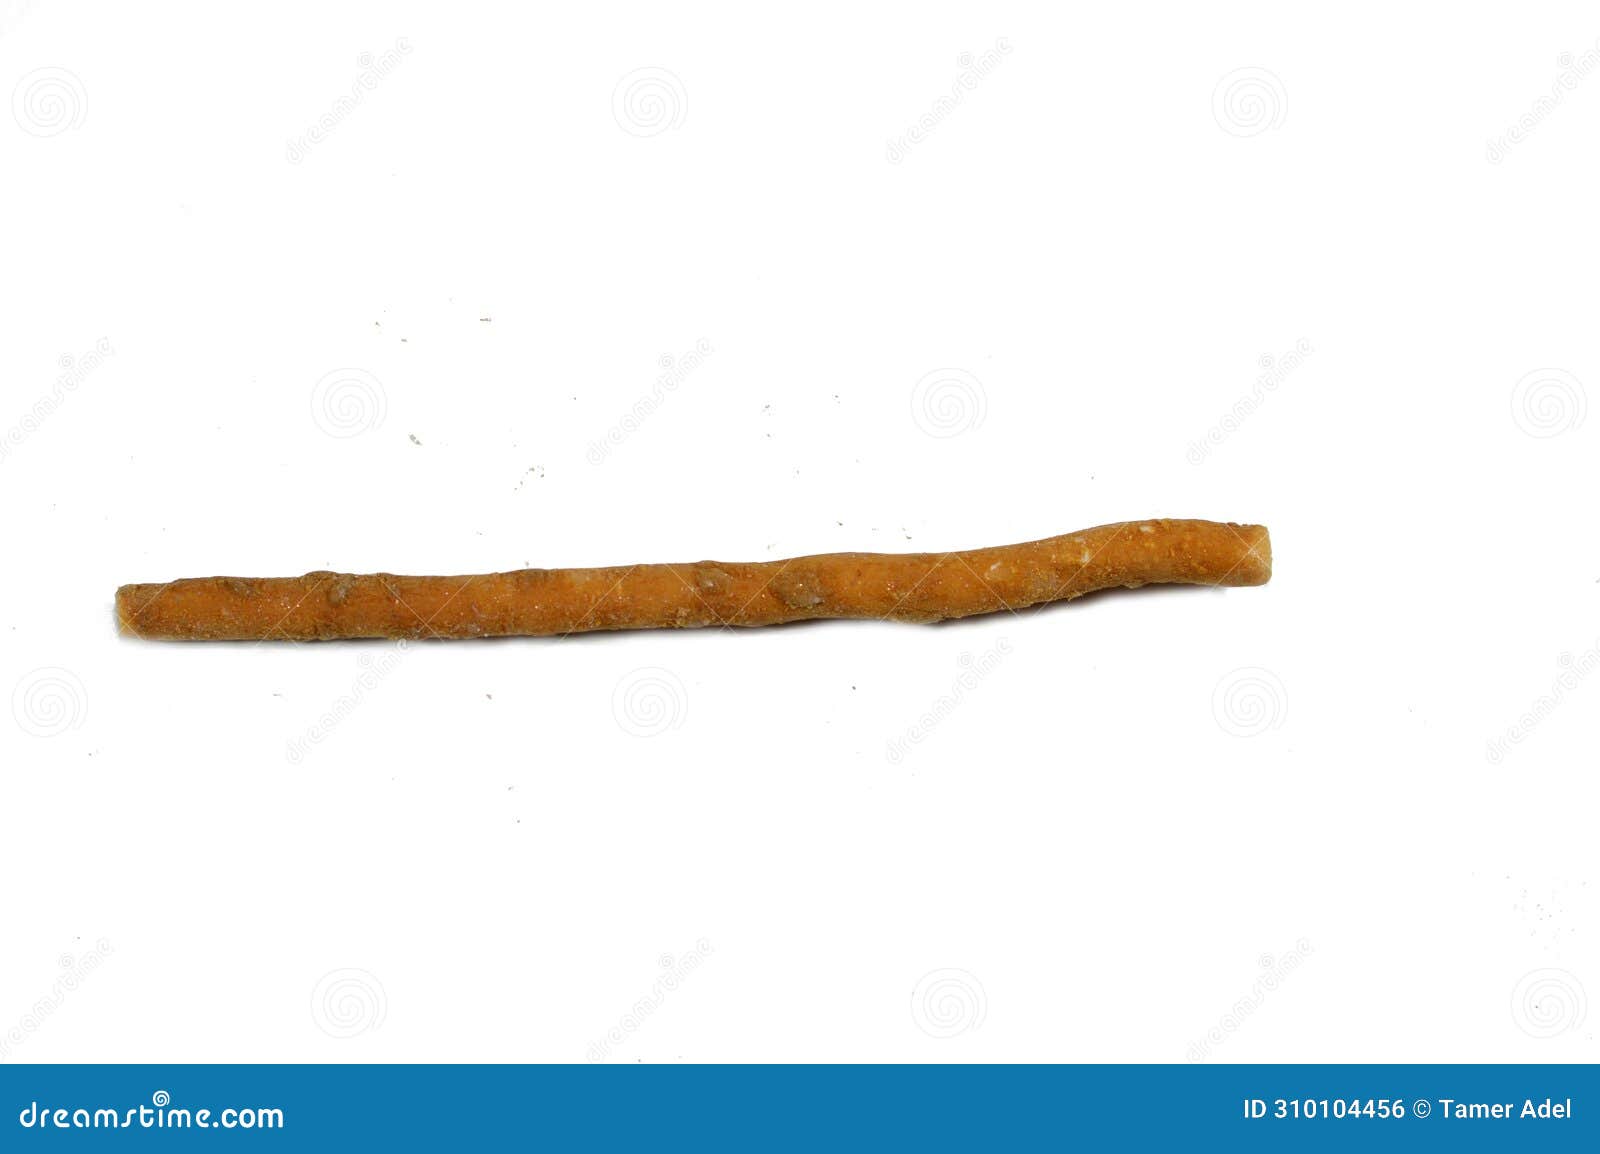 traditional miswak stick, the miswak is a teeth-cleaning twig made from the salvadora persica tree, used effectively as a natural